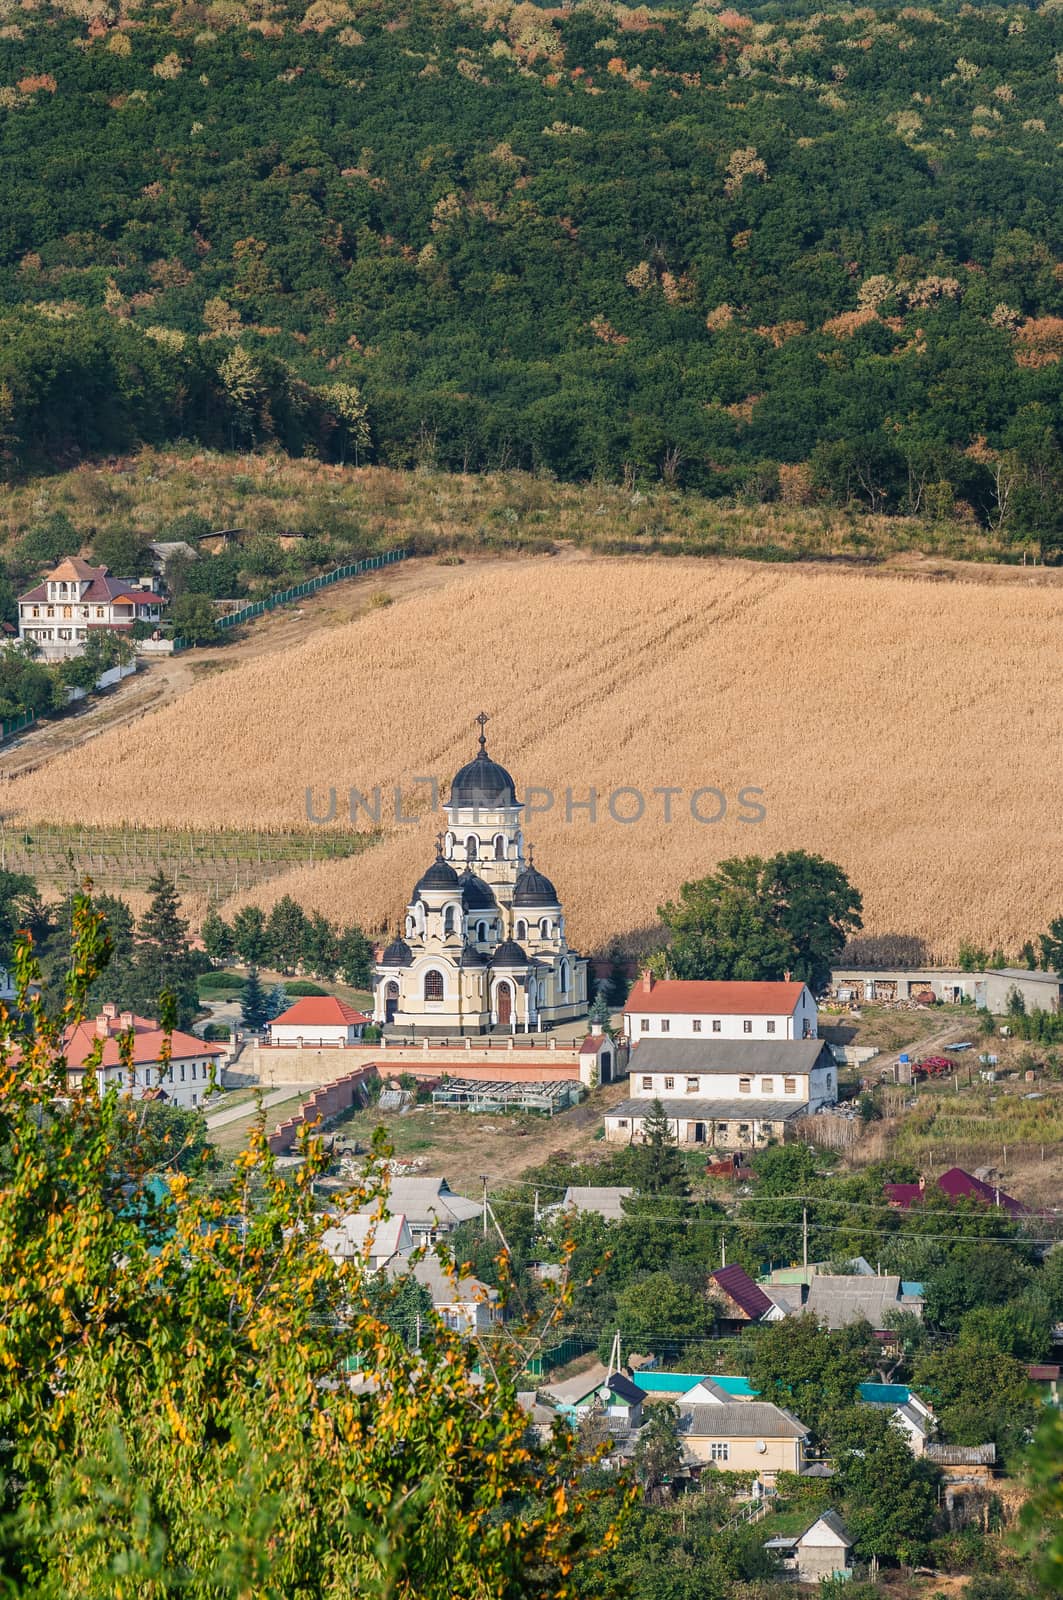 Landscape view with Capriana Monastery and the village around. Winter Church visible at center was built in Neo-Byzantine style in 1903. Capriana Orthodox Christian Monastery is one of the oldest monasteries of Moldova, first time mentioned in 1429.